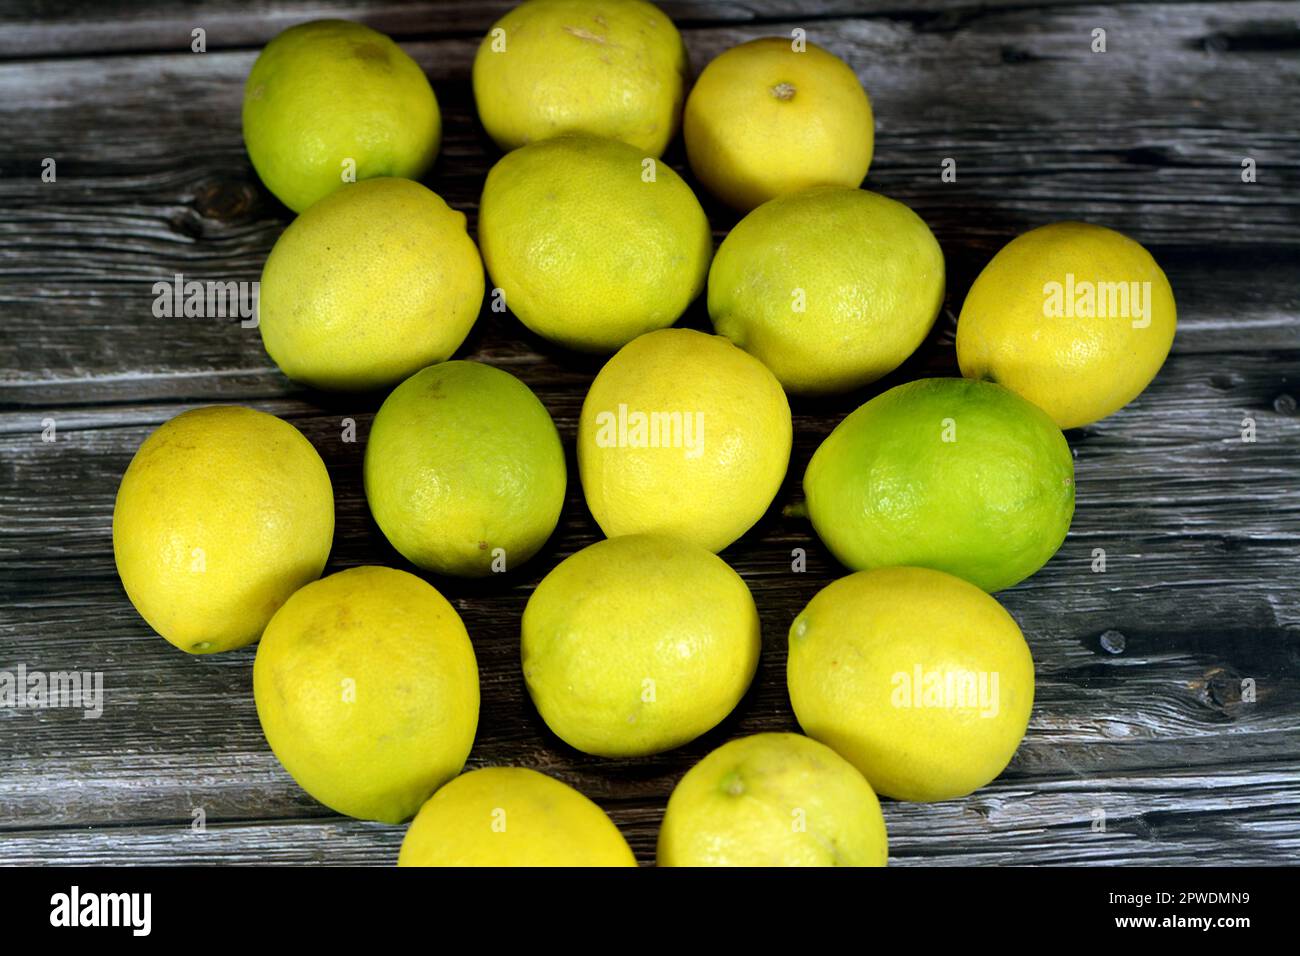 Pile of fresh lemons, The lemon (Citrus limon) is a species of small evergreen trees in the flowering plant family Rutaceae, native to Asia, used in r Stock Photo